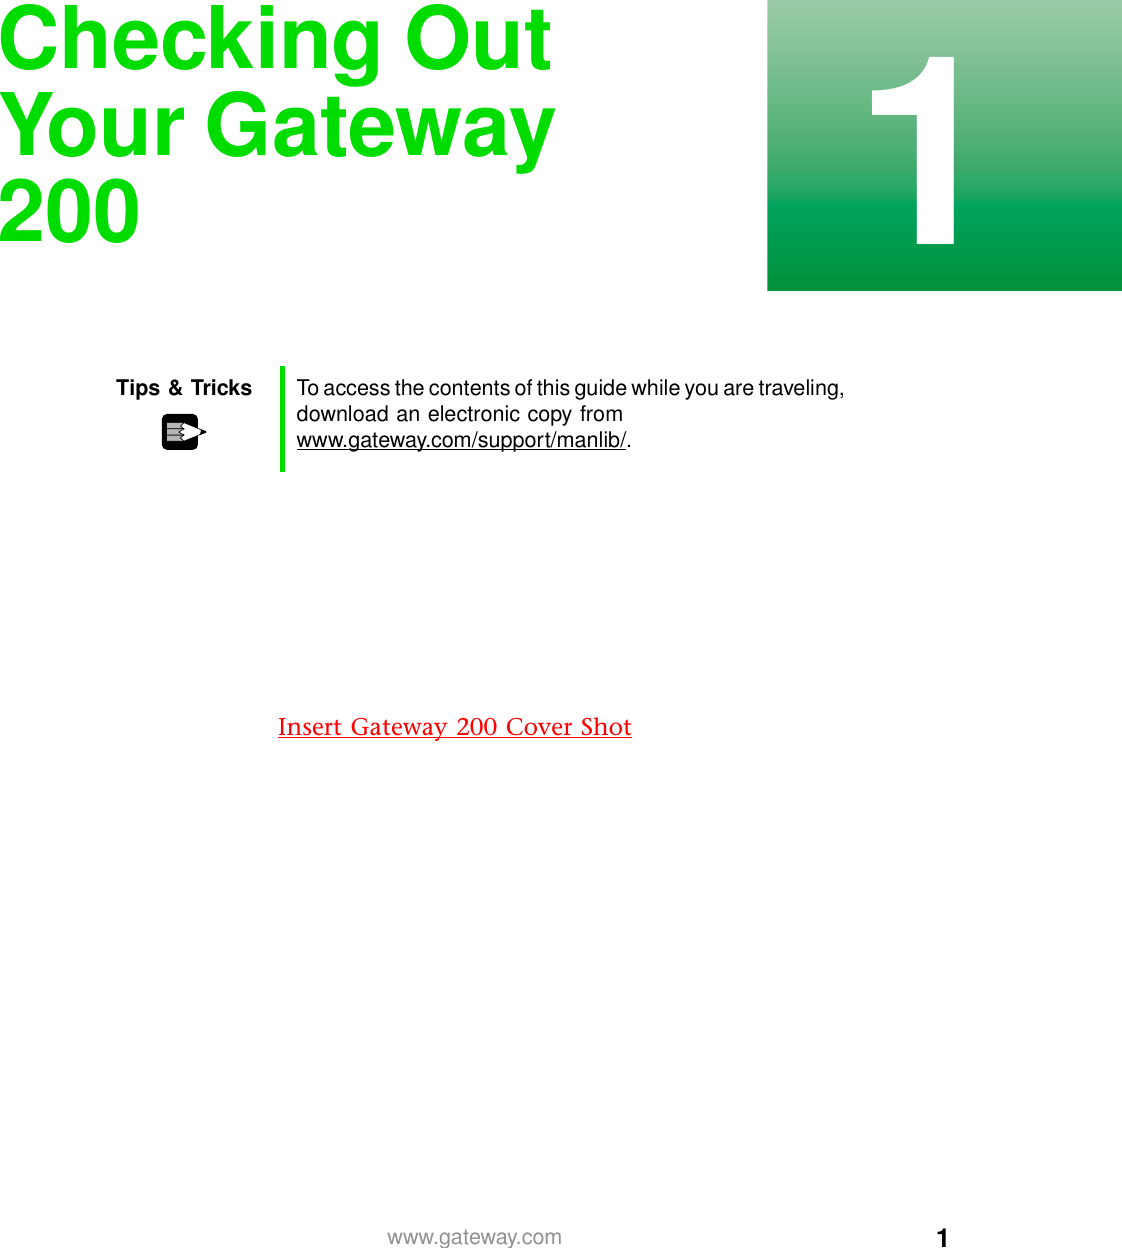 11www.gateway.comChecking Out Your Gateway 200Tips &amp; Tricks To access the contents of this guide while you are traveling, download an electronic copy from www.gateway.com/support/manlib/.Insert Gateway 200 Cover Shot